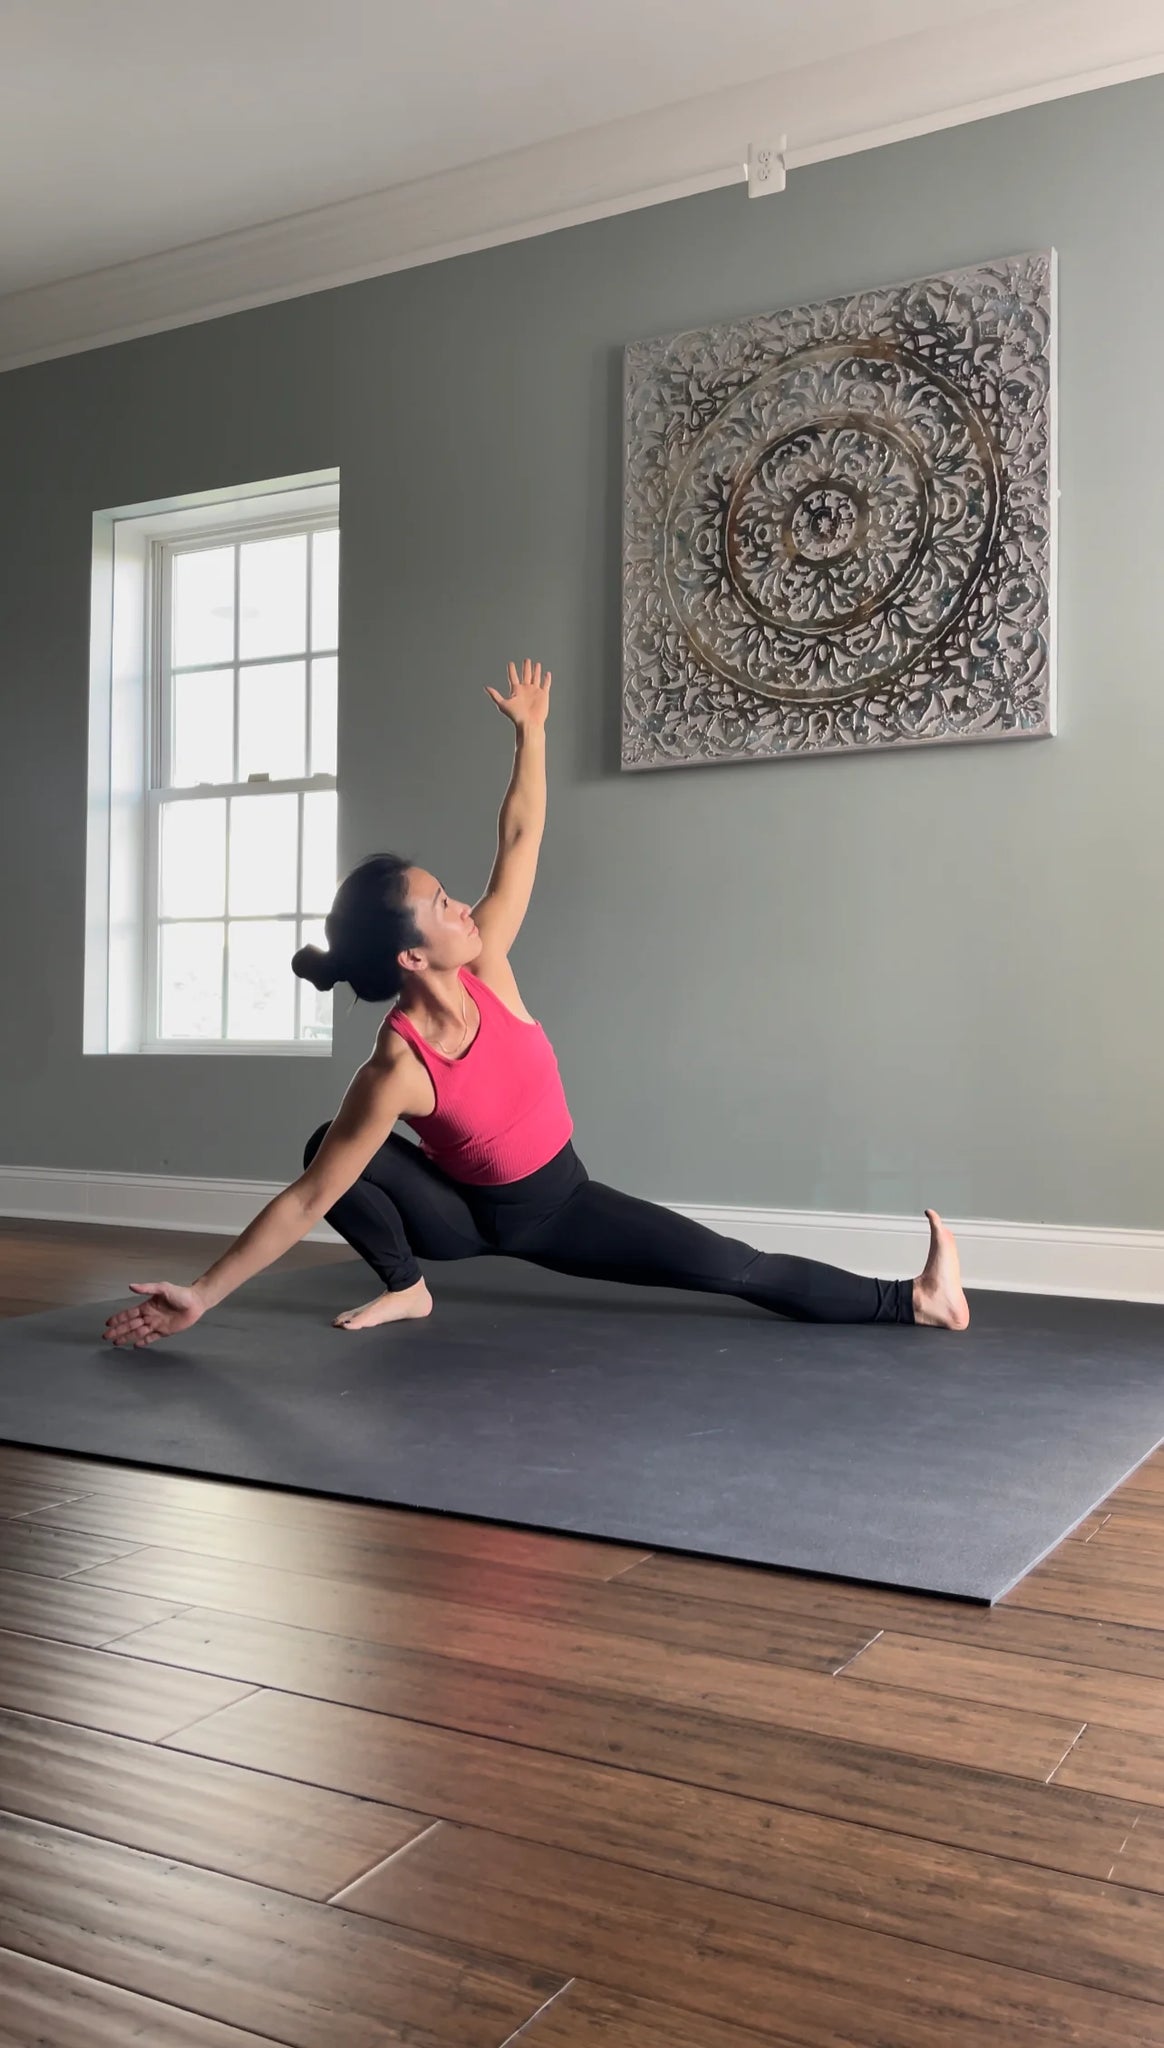 Home Practice with Manduka PRO Squared by Esther Kim